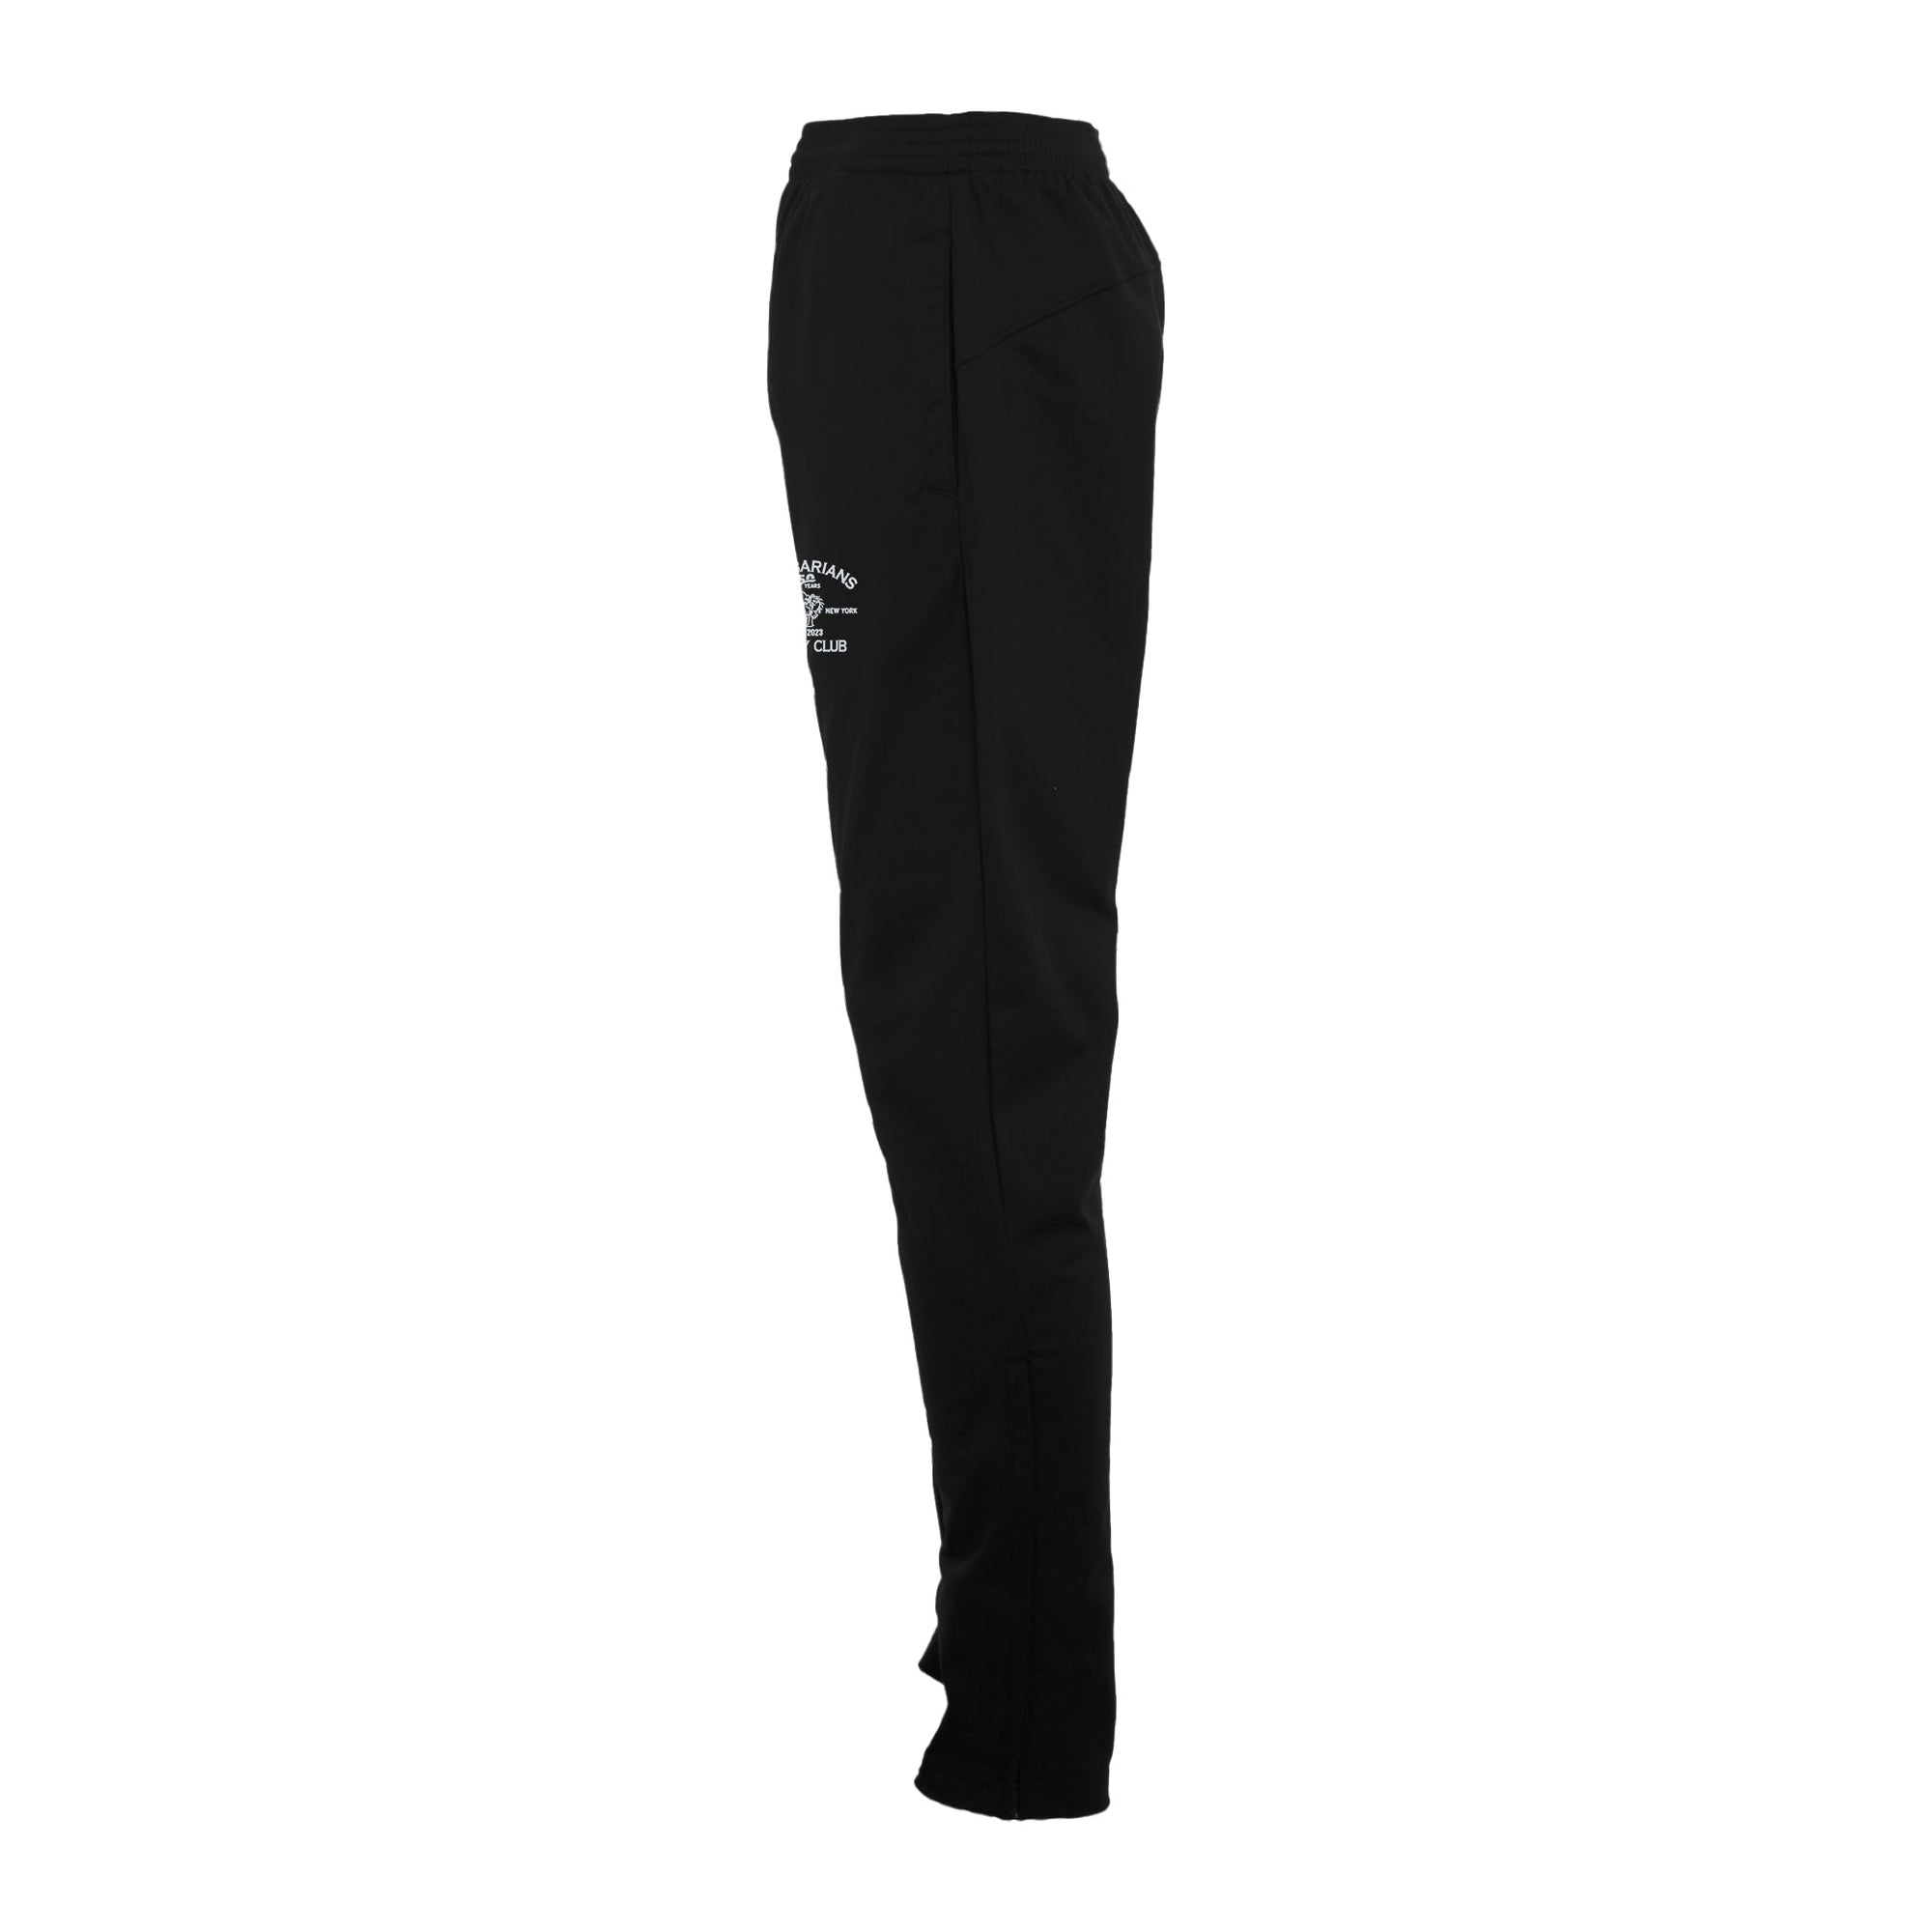 Rugby Imports Binghamton Barbarians Unisex Tapered Leg Pant